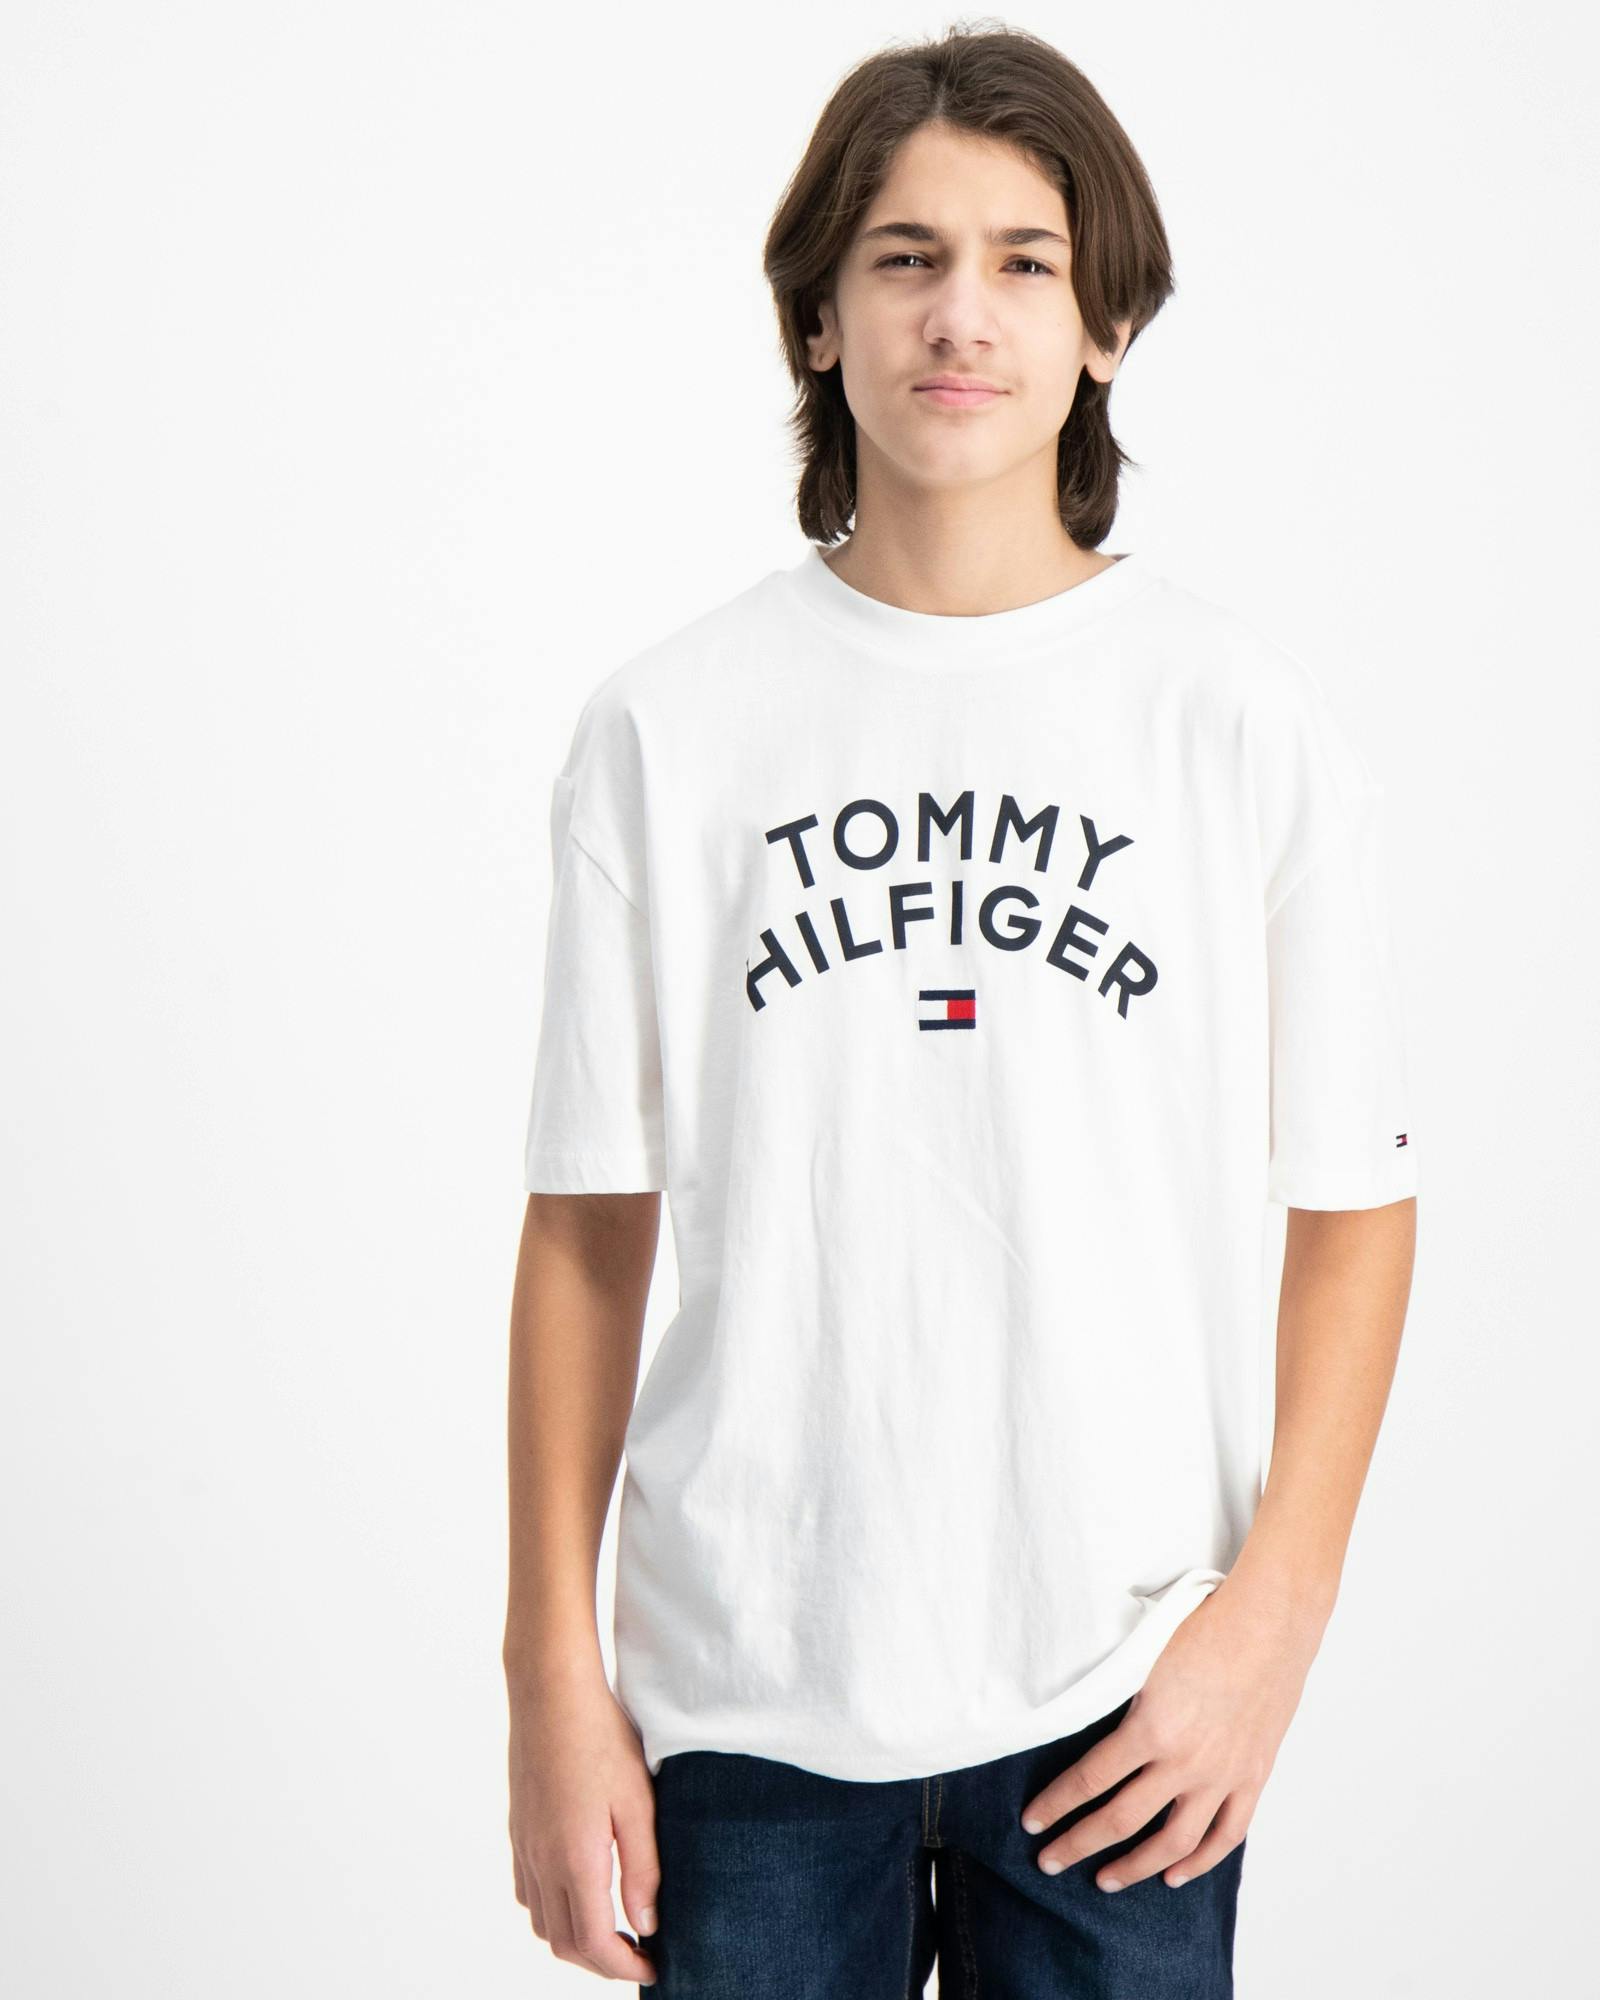 TOMMY HILFIGER FLAG TEE S/S